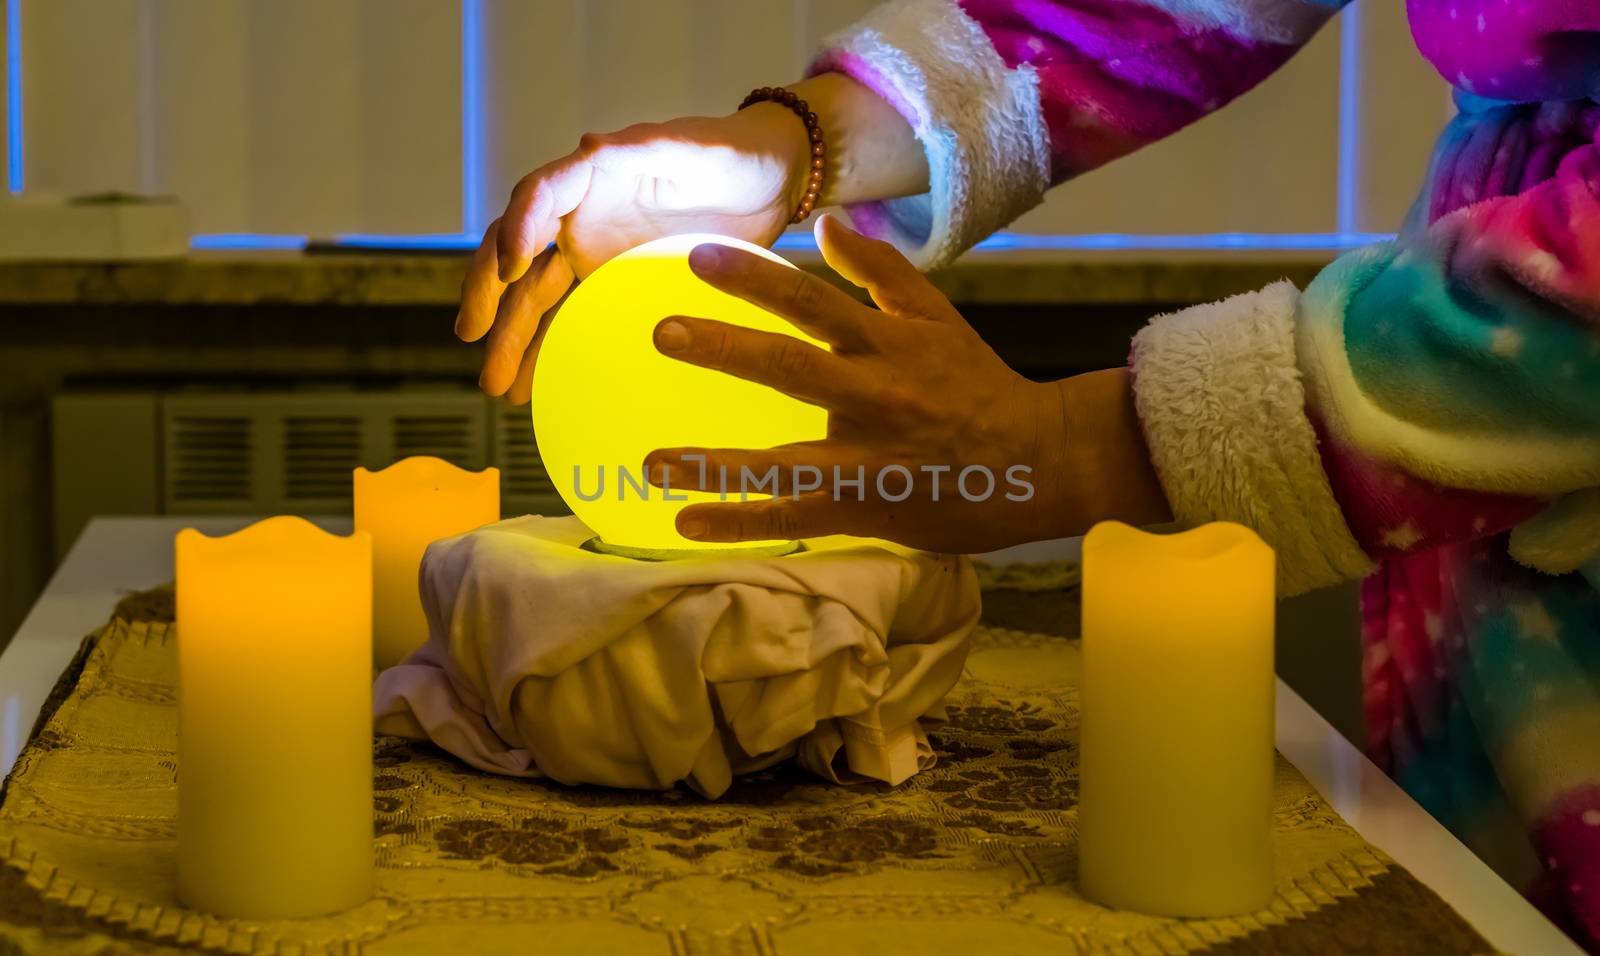 fortune teller moving hands around a lighted sphere, traditional spirituality and witchcraft by charlottebleijenberg